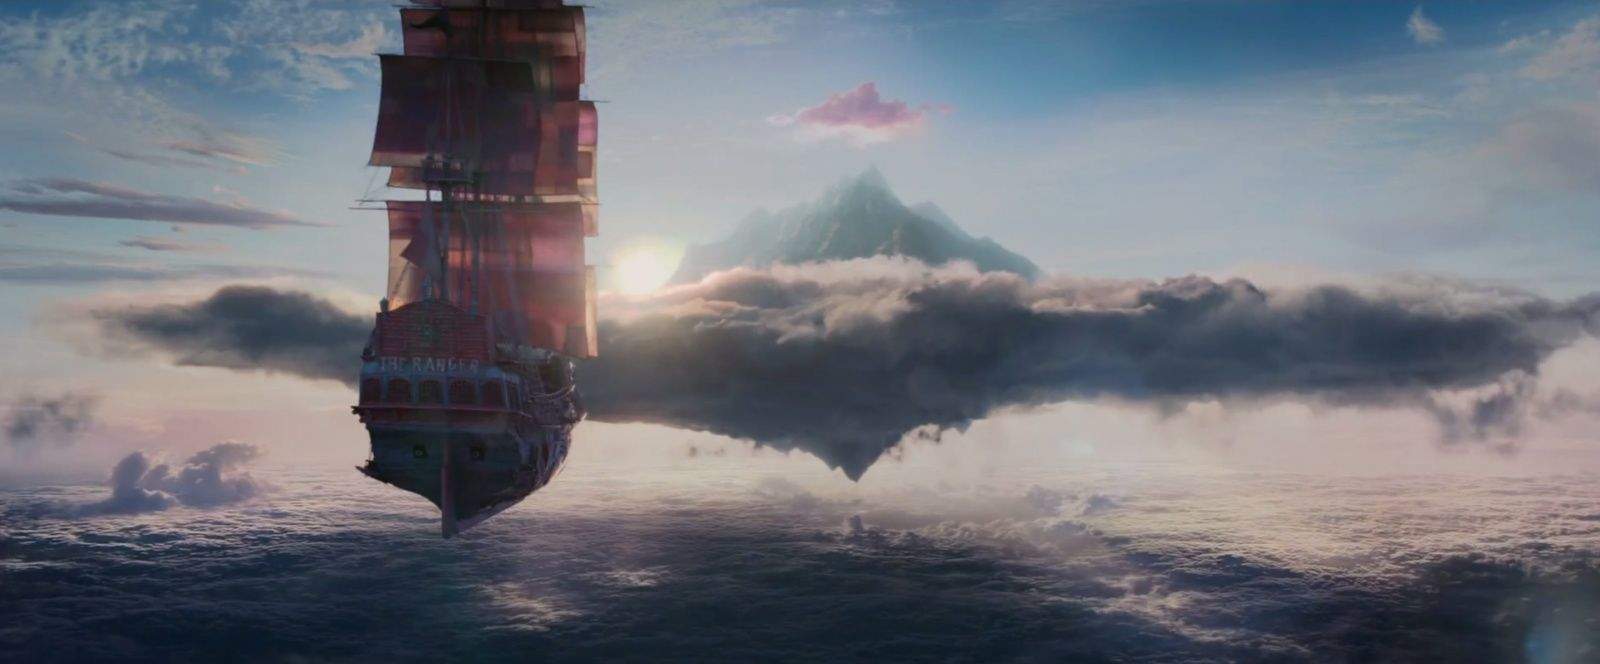 Sail away to Neverland next summer. Photo: Warner Bros. Pictures